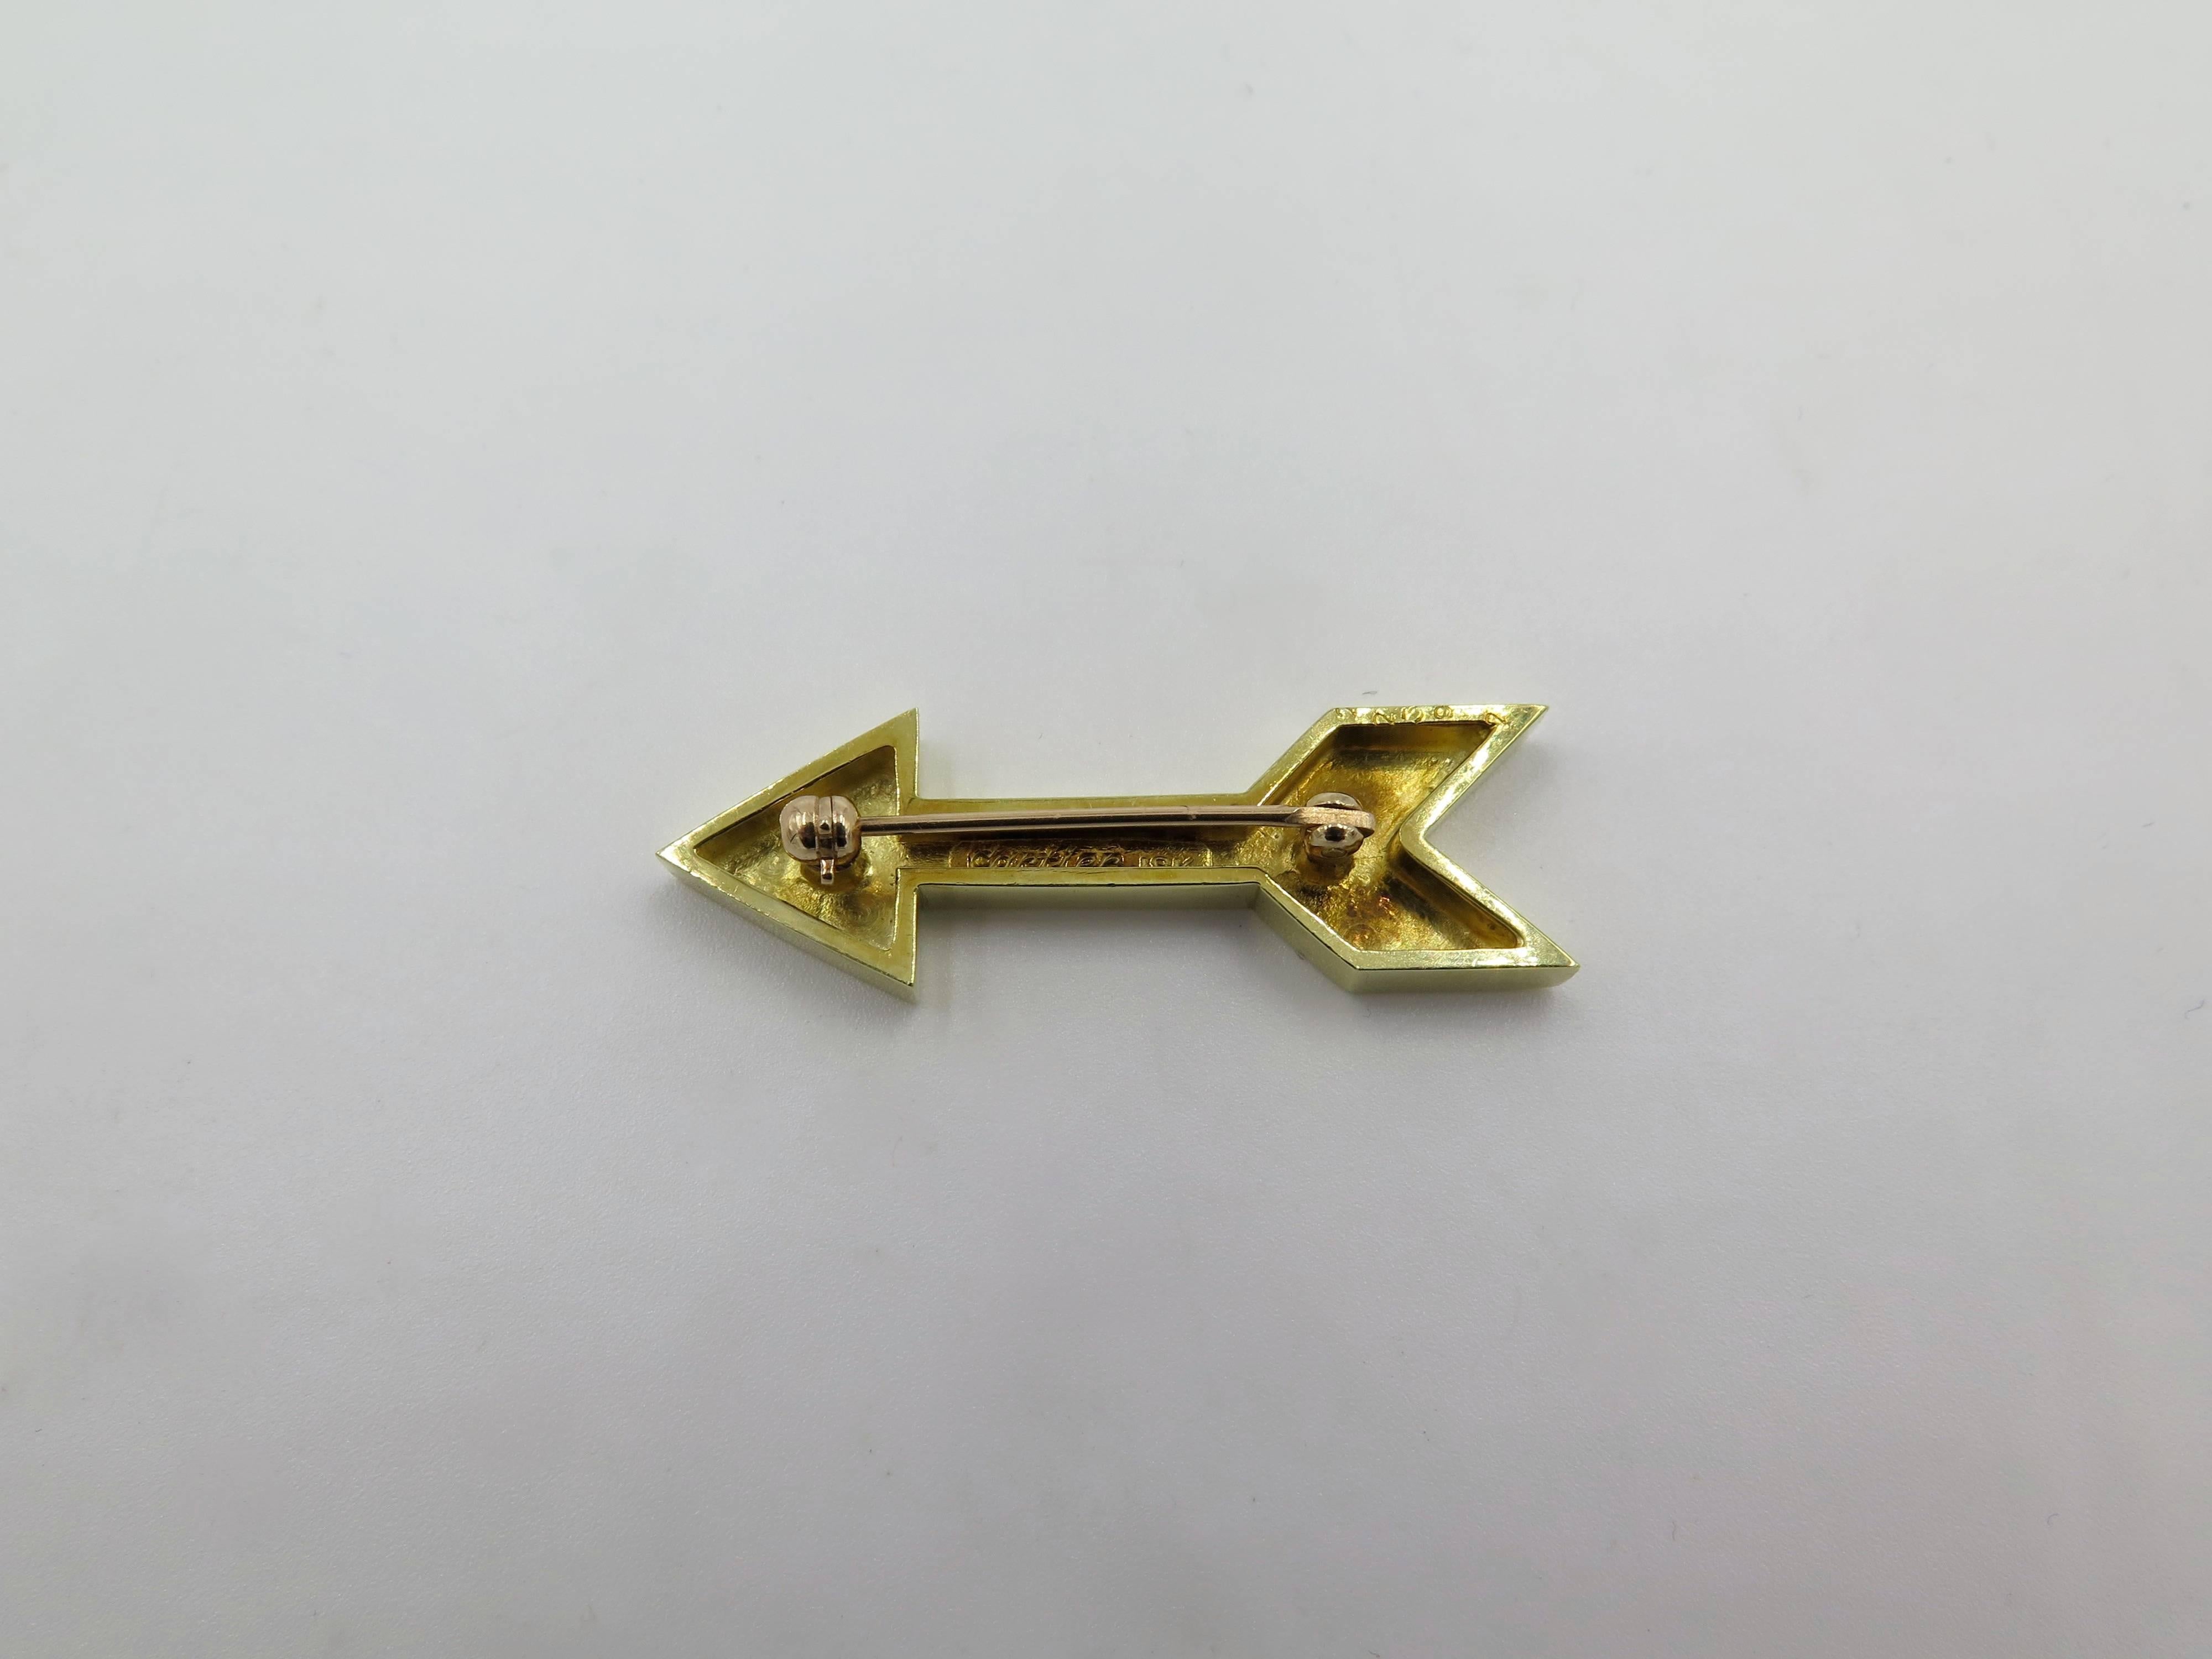 An 18 karat yellow gold arrow brooch. Cartier. Circa 1970. Of polished gold design. Length is approximately 1 1/2 inches.  Gross weight is approximately 8.3 grams. Stamped Cartier, 18K, numbered 22392.